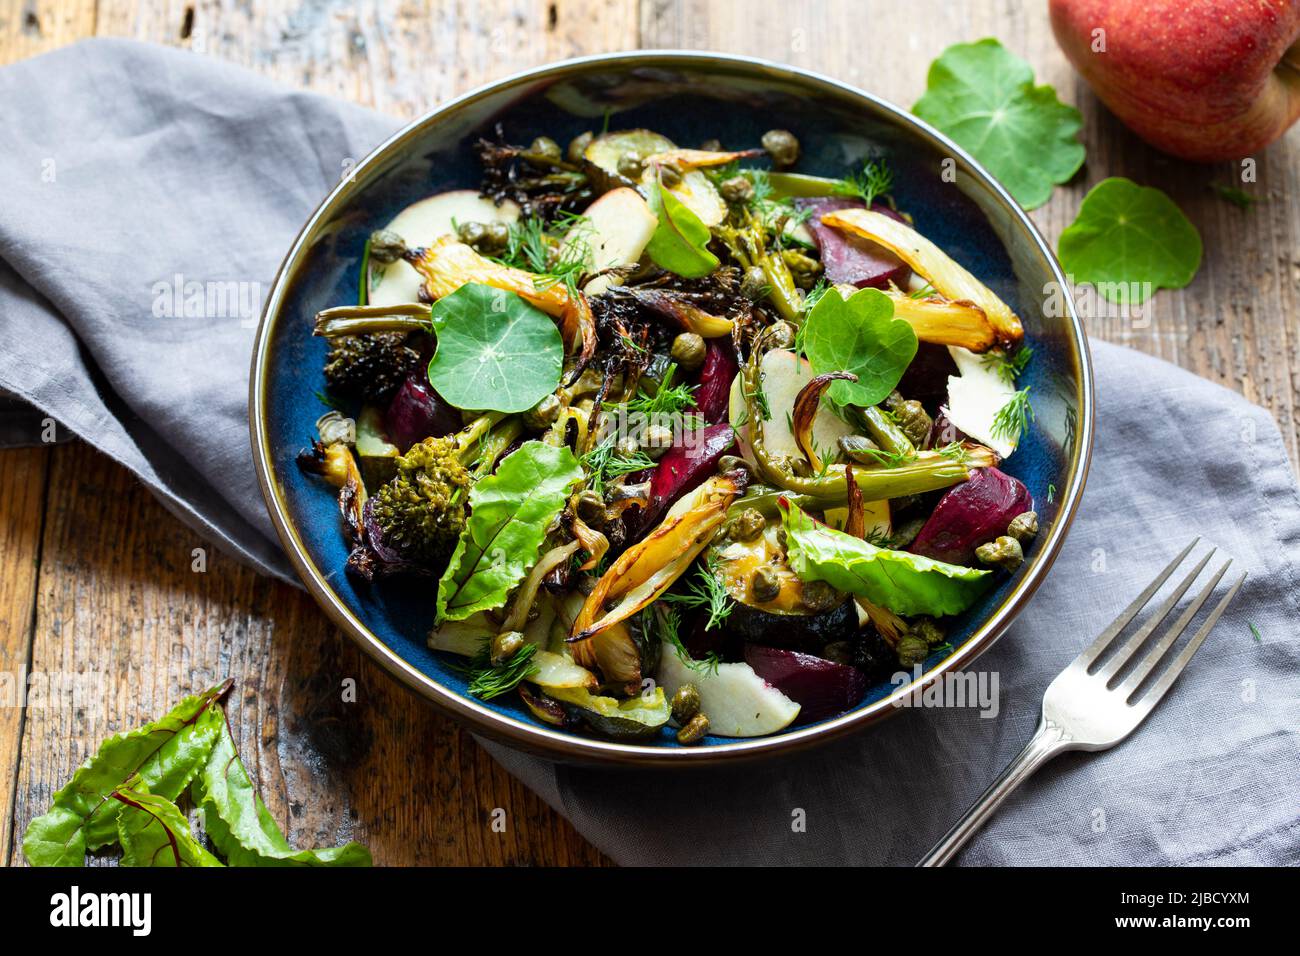 Warm salad with roast beetroor, broccoli, apple, fennel and crispy capers Stock Photo